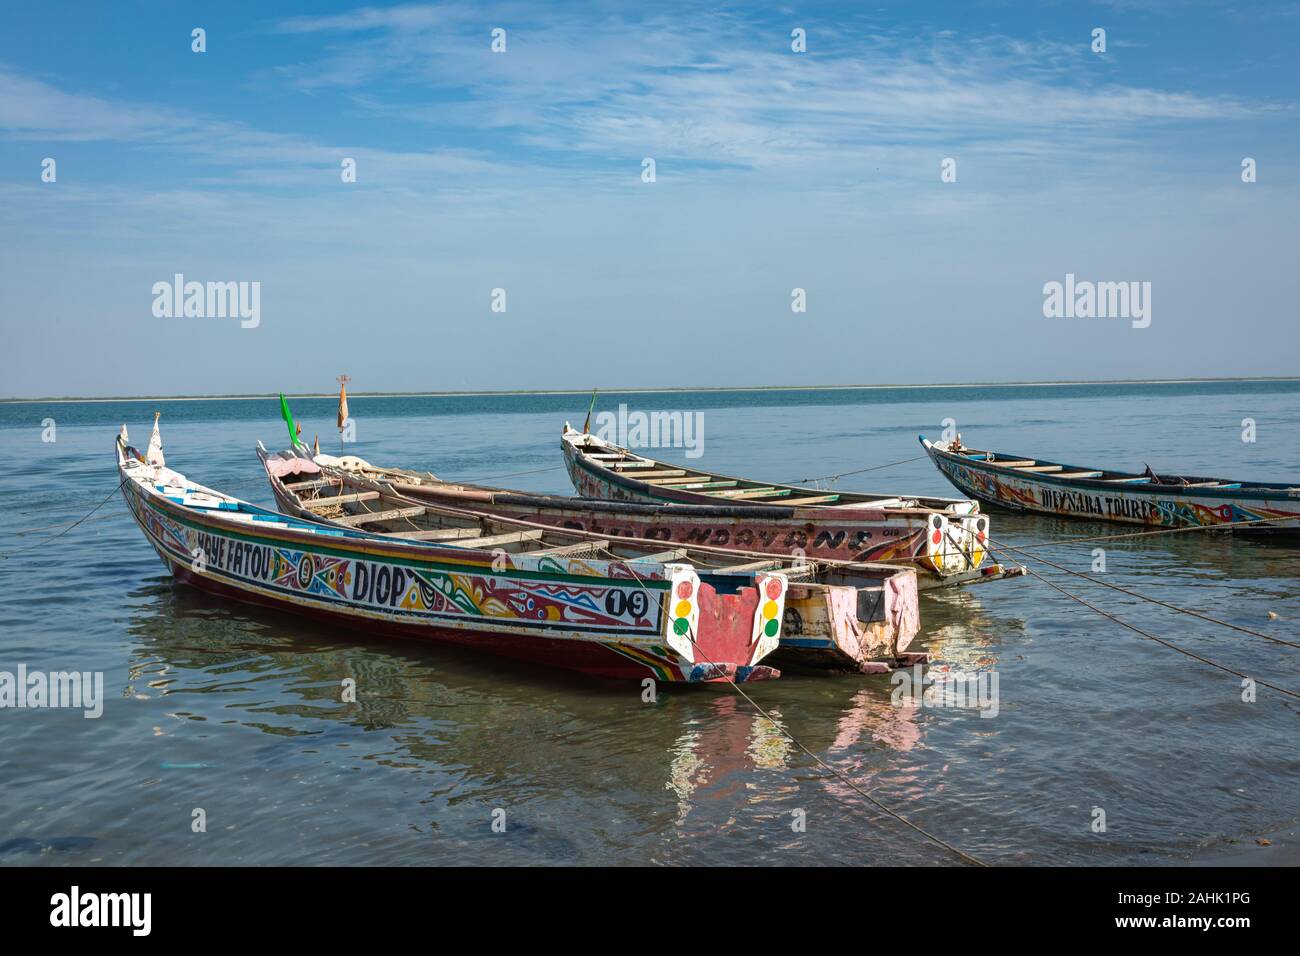 Traditional painted wooden fishing boat in Djiffer, Senegal. West Africa. Stock Photo